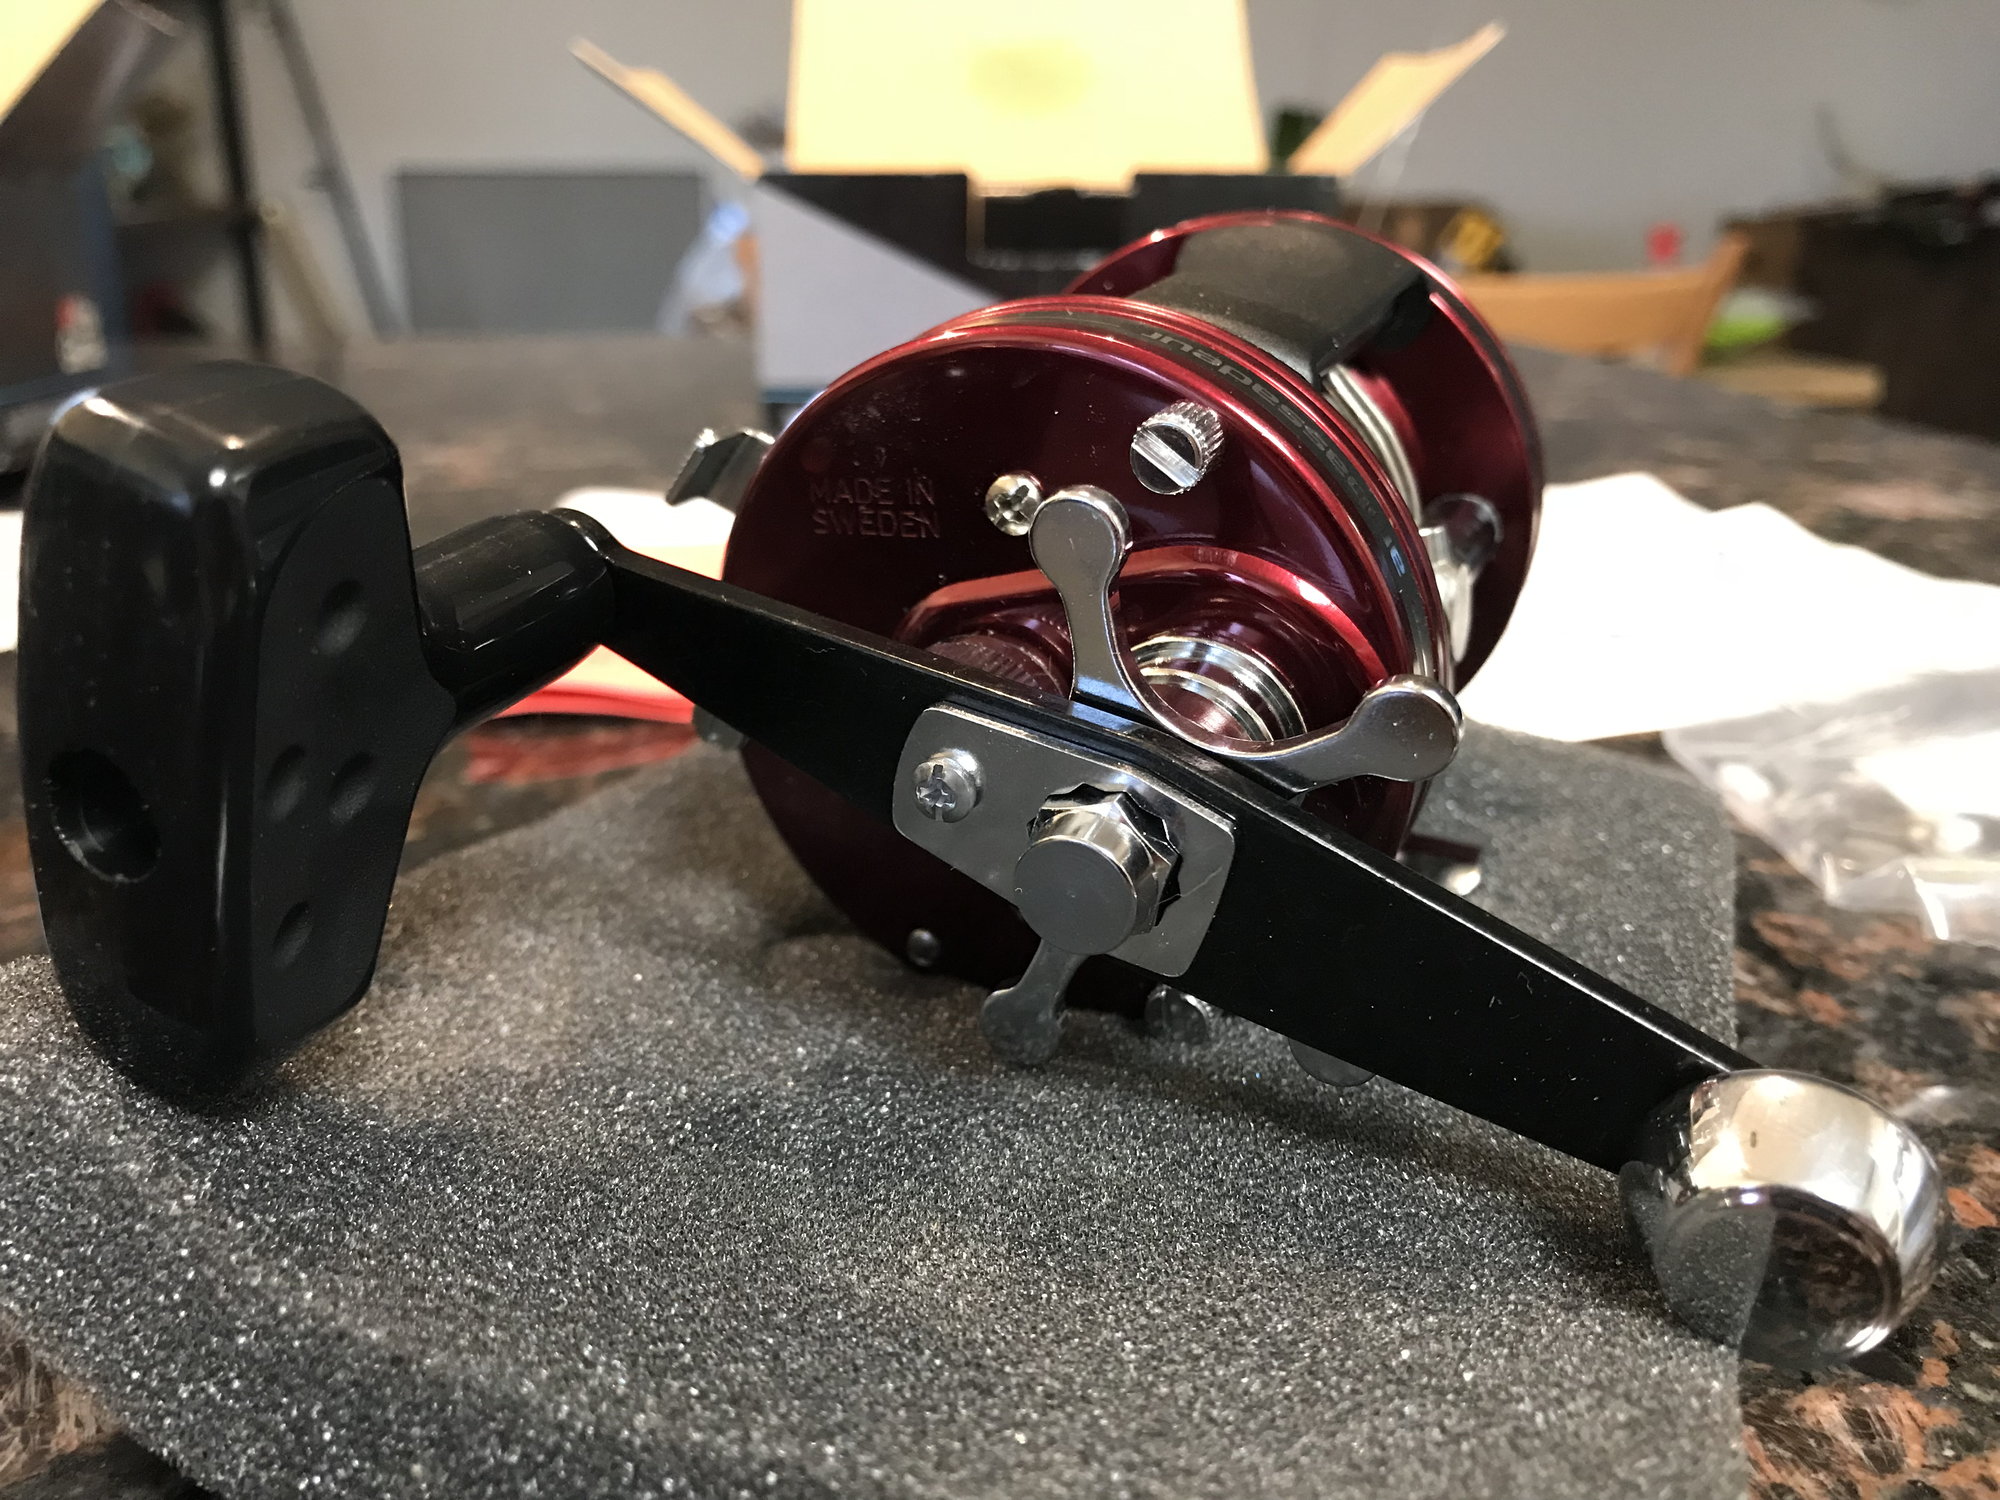 Selling a Abu Garcia test 6500 striped bass collectors series reel with  papers,box, instructions & reel parts all original ma - General  Buy/Sell/Trade Forum - SurfTalk